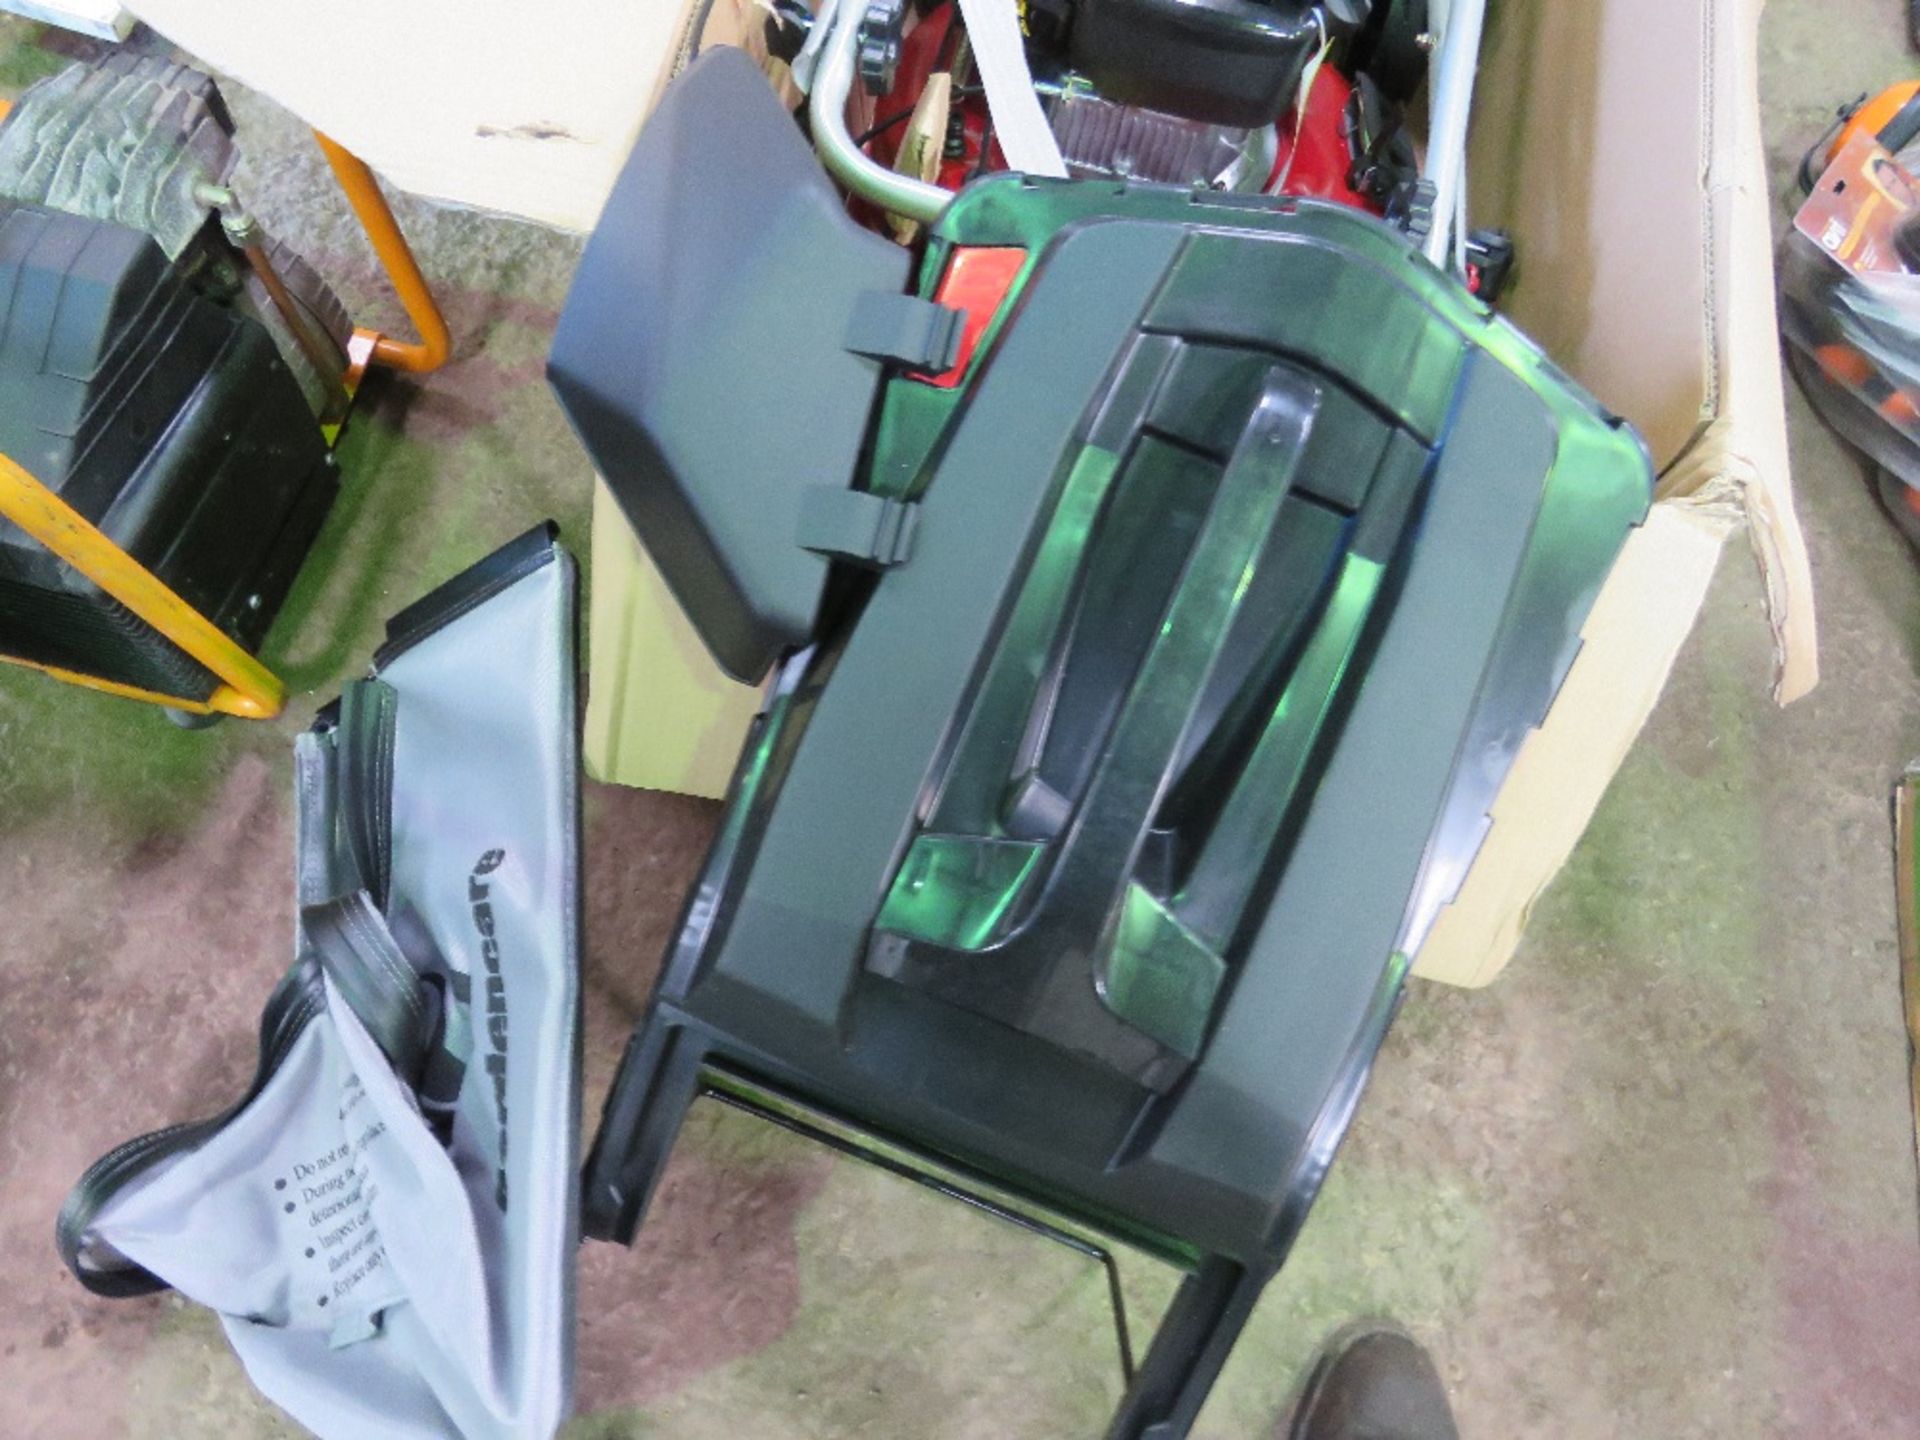 GARDENCARE LMX46SP PETROL ENGINED MOWER, UNUSED IN A BOX. - Image 5 of 7